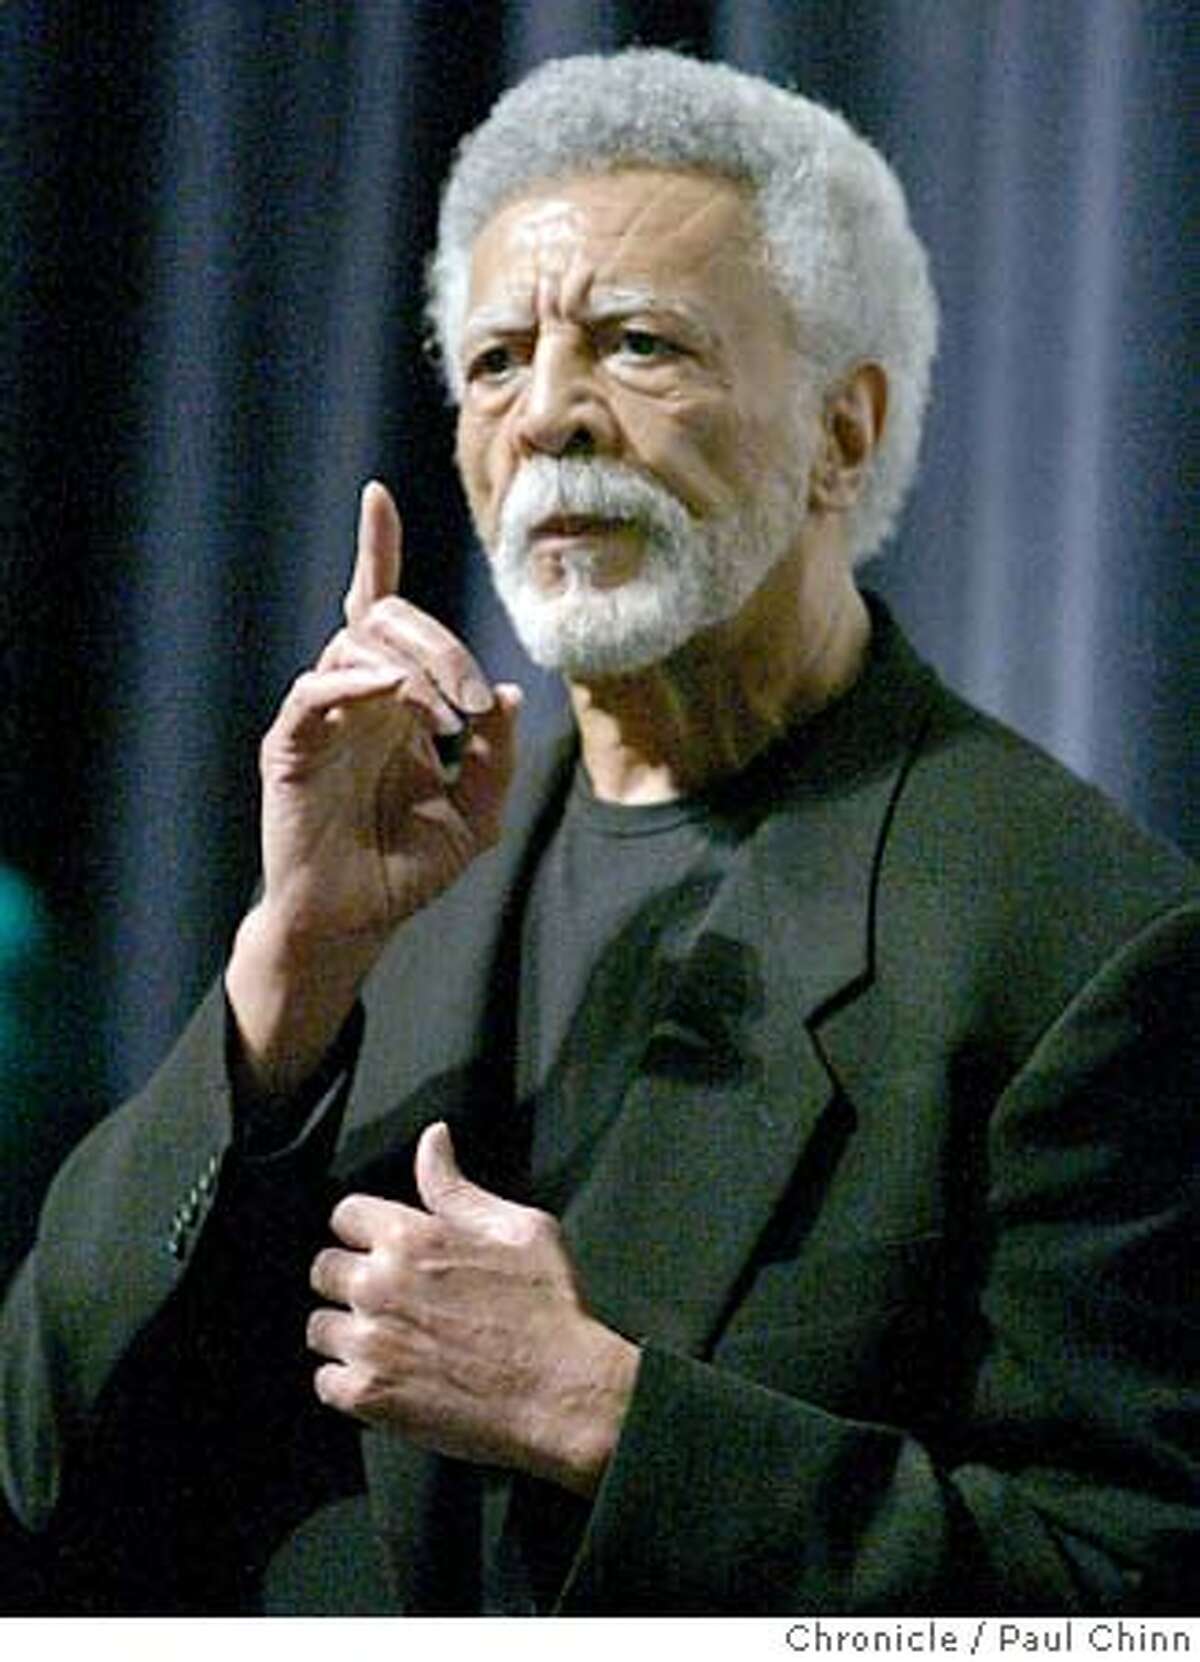 Former East Bay congressman Ron Dellums announced his candidacy for mayor of Oakland during an energetic gathering at Laney College on 10/7/05 in Oakland, Calif. PAUL CHINN/The Chronicle